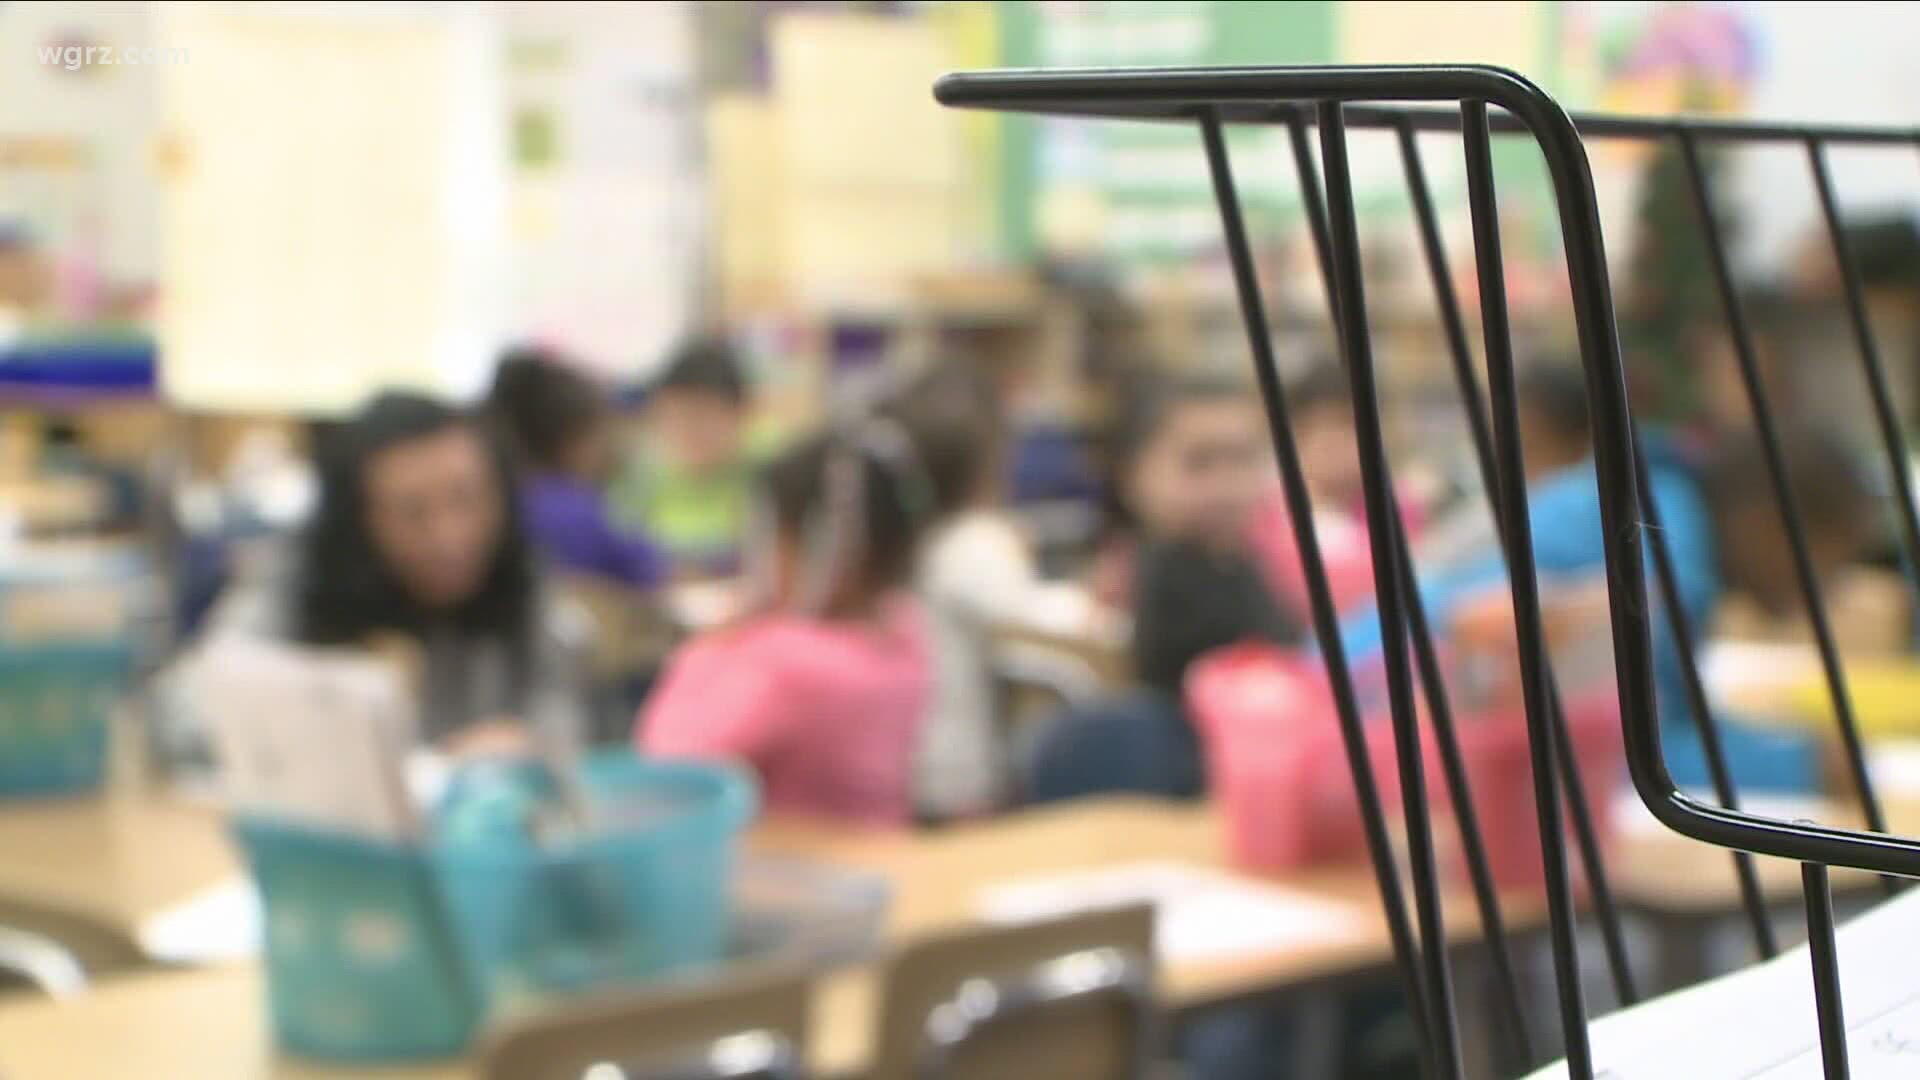 We've been trying to get Buffalo public school leaders to sit down for an interview about teachers' concerns and questions.